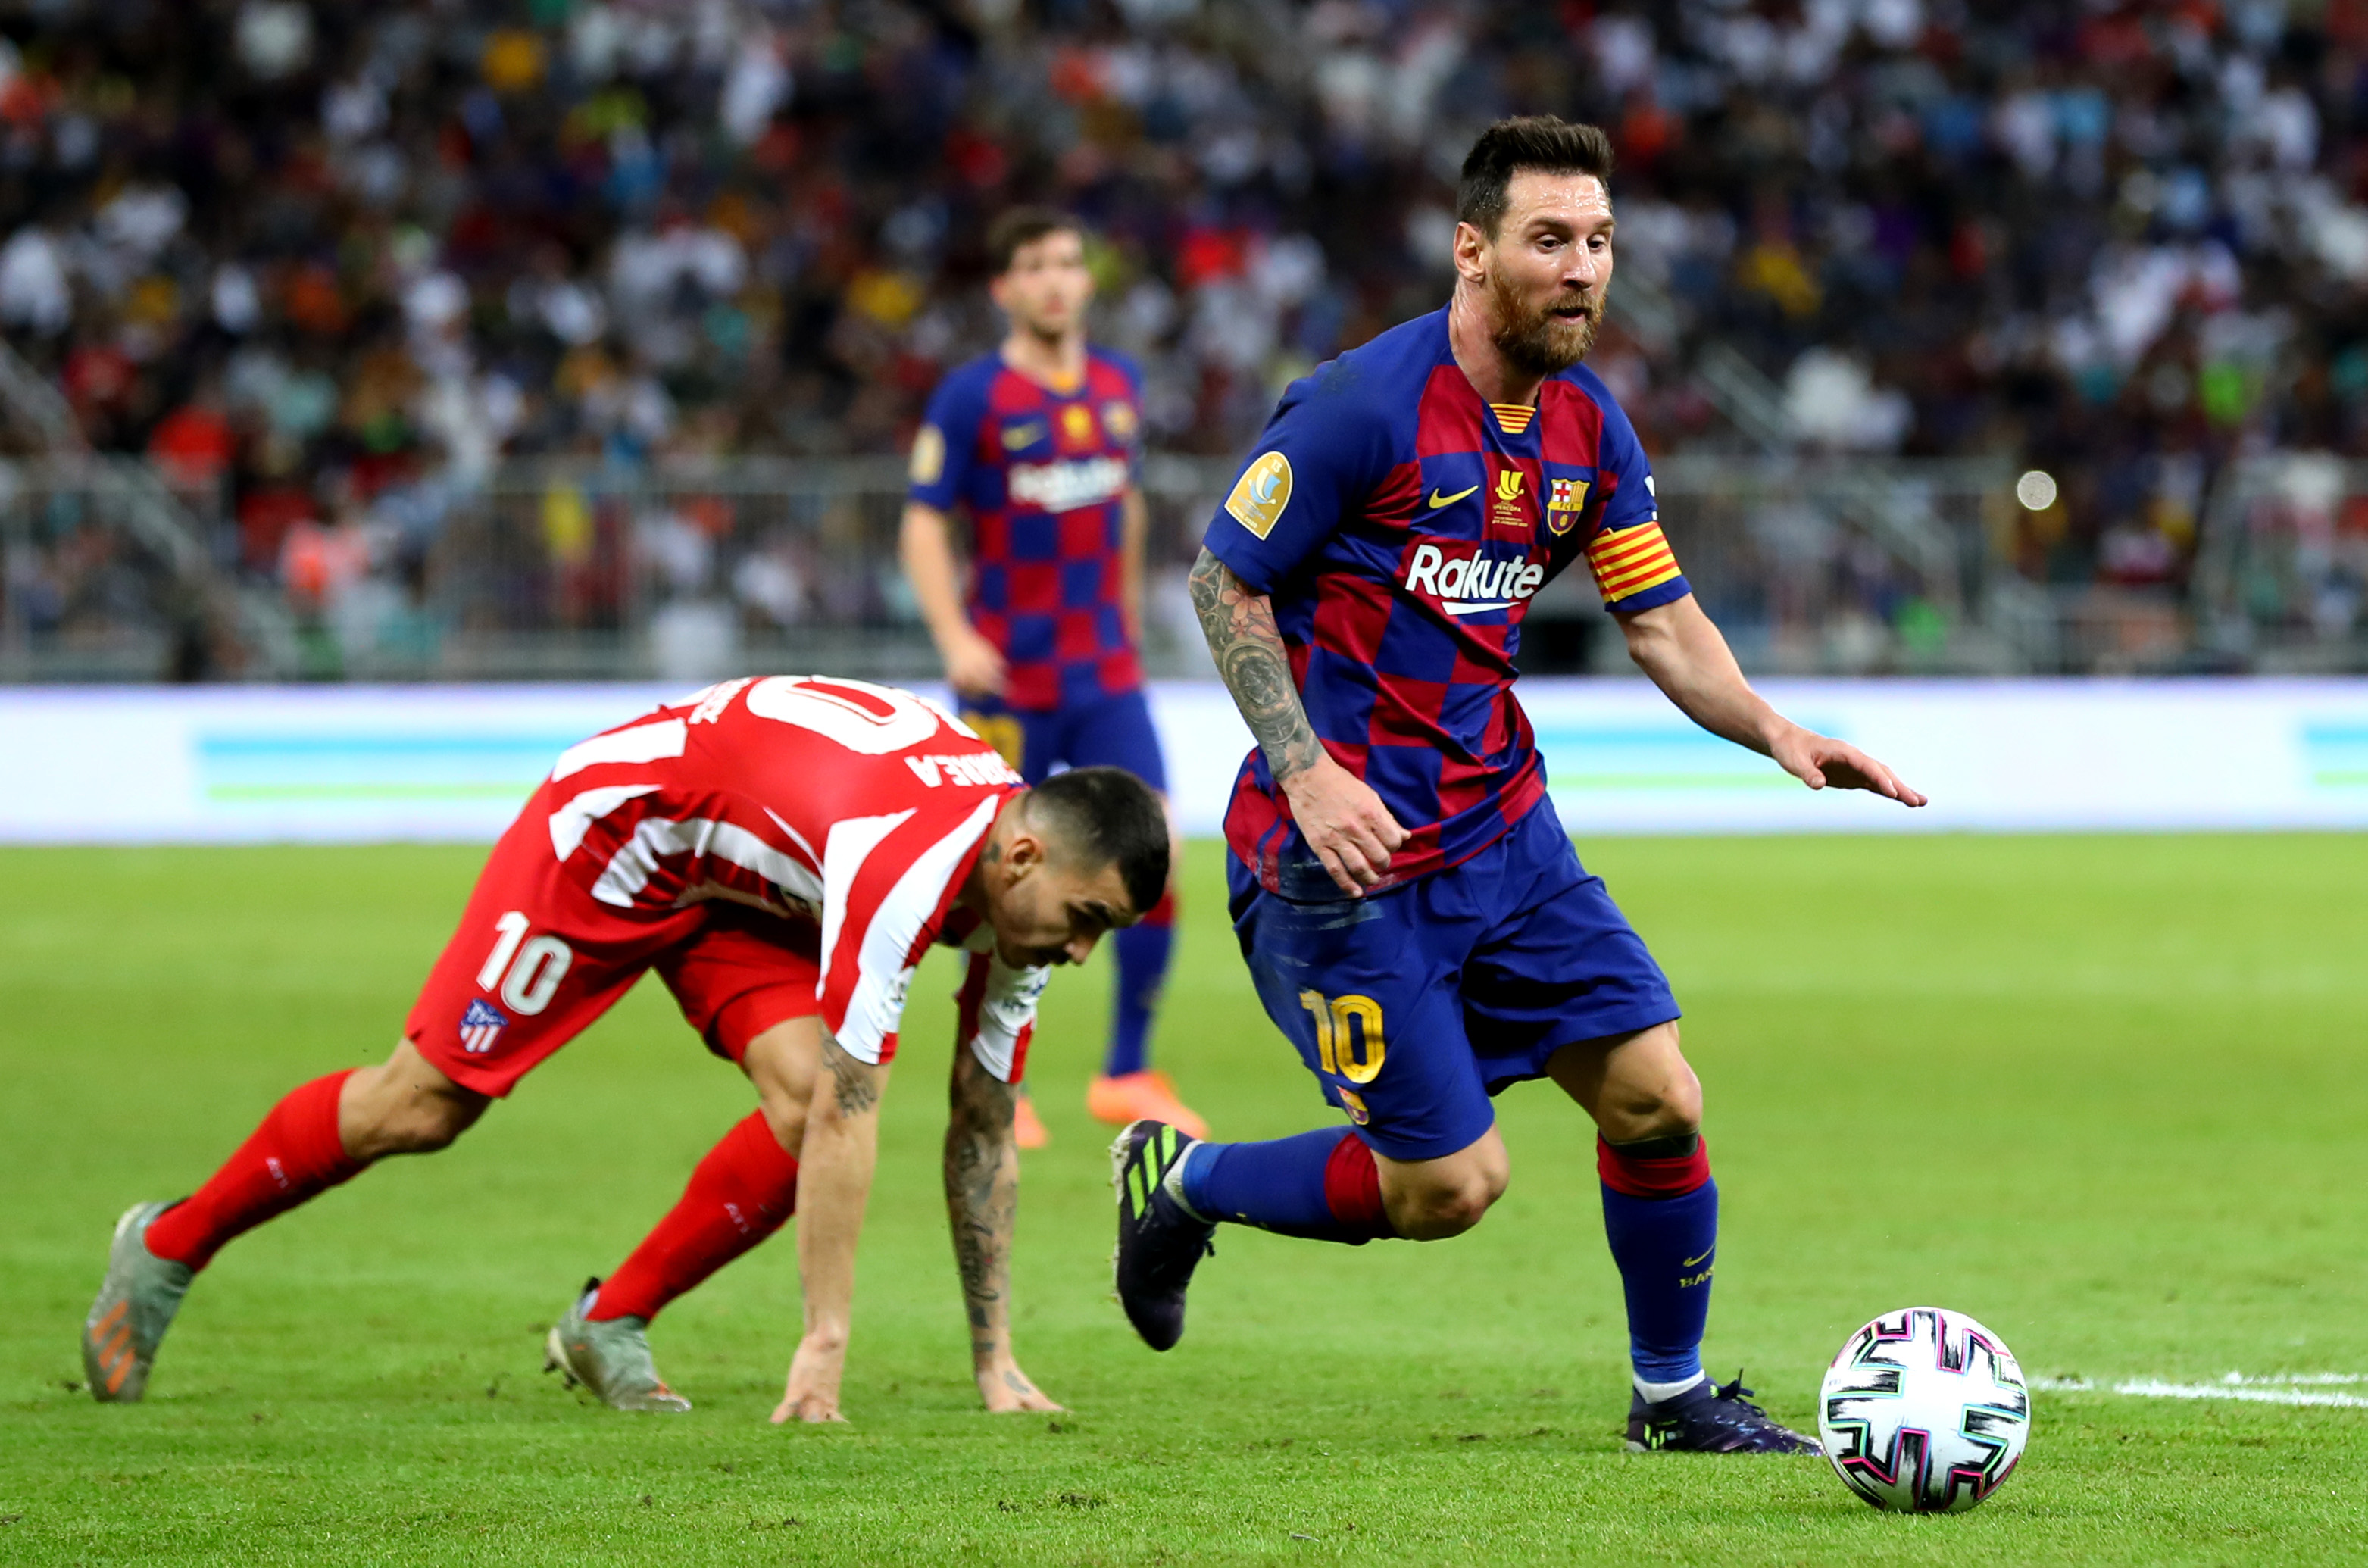 FC Barcelona’s Lionel Messi in action.